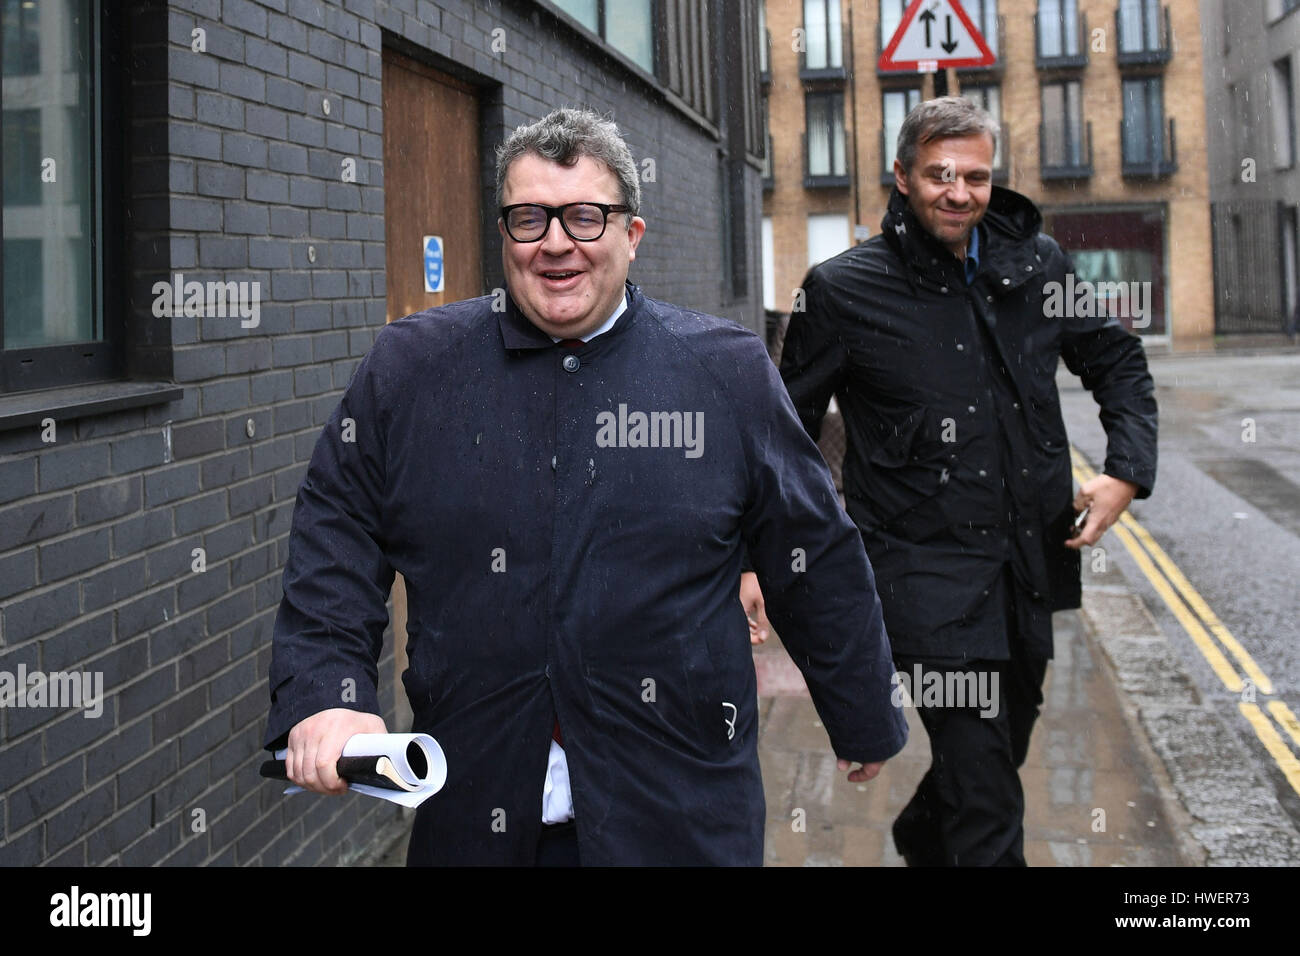 Labour's deputy leader Tom Watson departs after a meeting at Unison's headquarters in central London, as he and Jeremy Corbyn have issued a joint statement agreeing to strengthen party unity after in-fighting at the top of Labour following claims of a takeover plot. Stock Photo